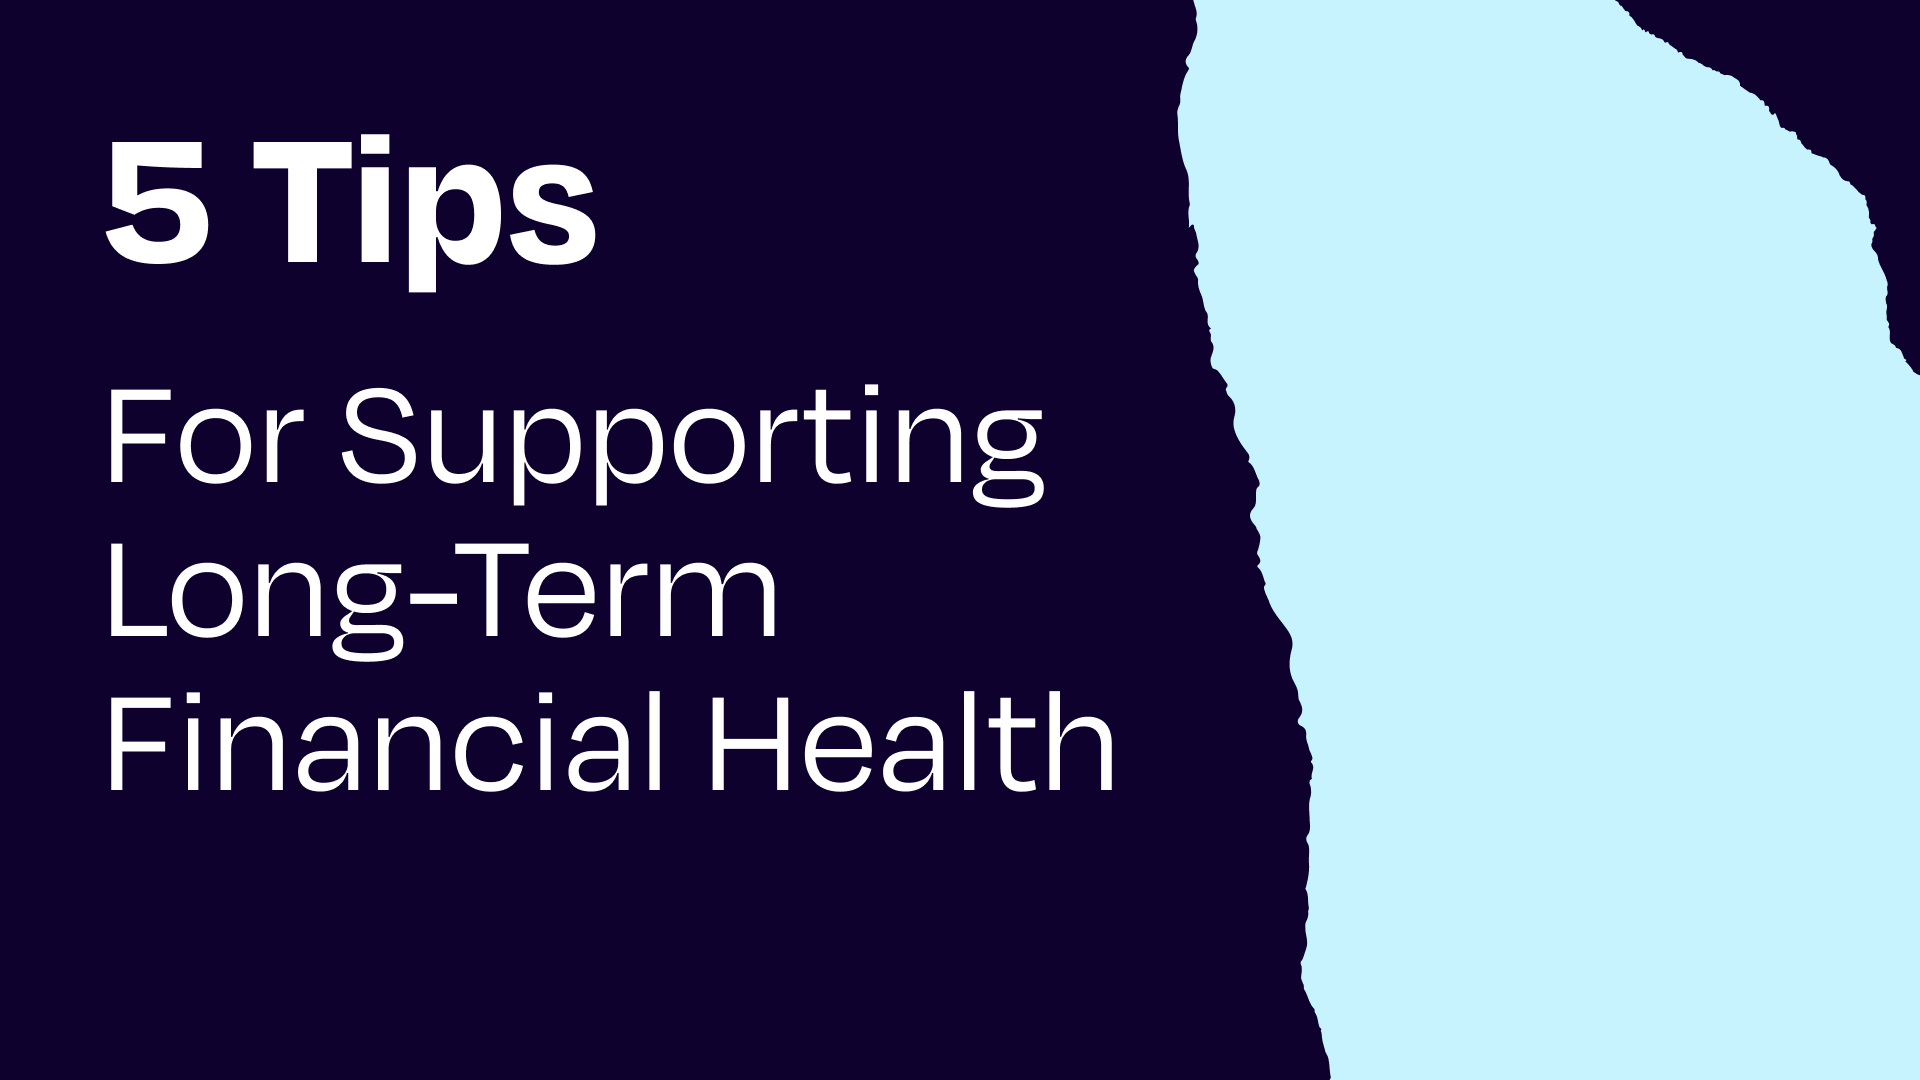 Five ways to support your teams’ long-term financial health!